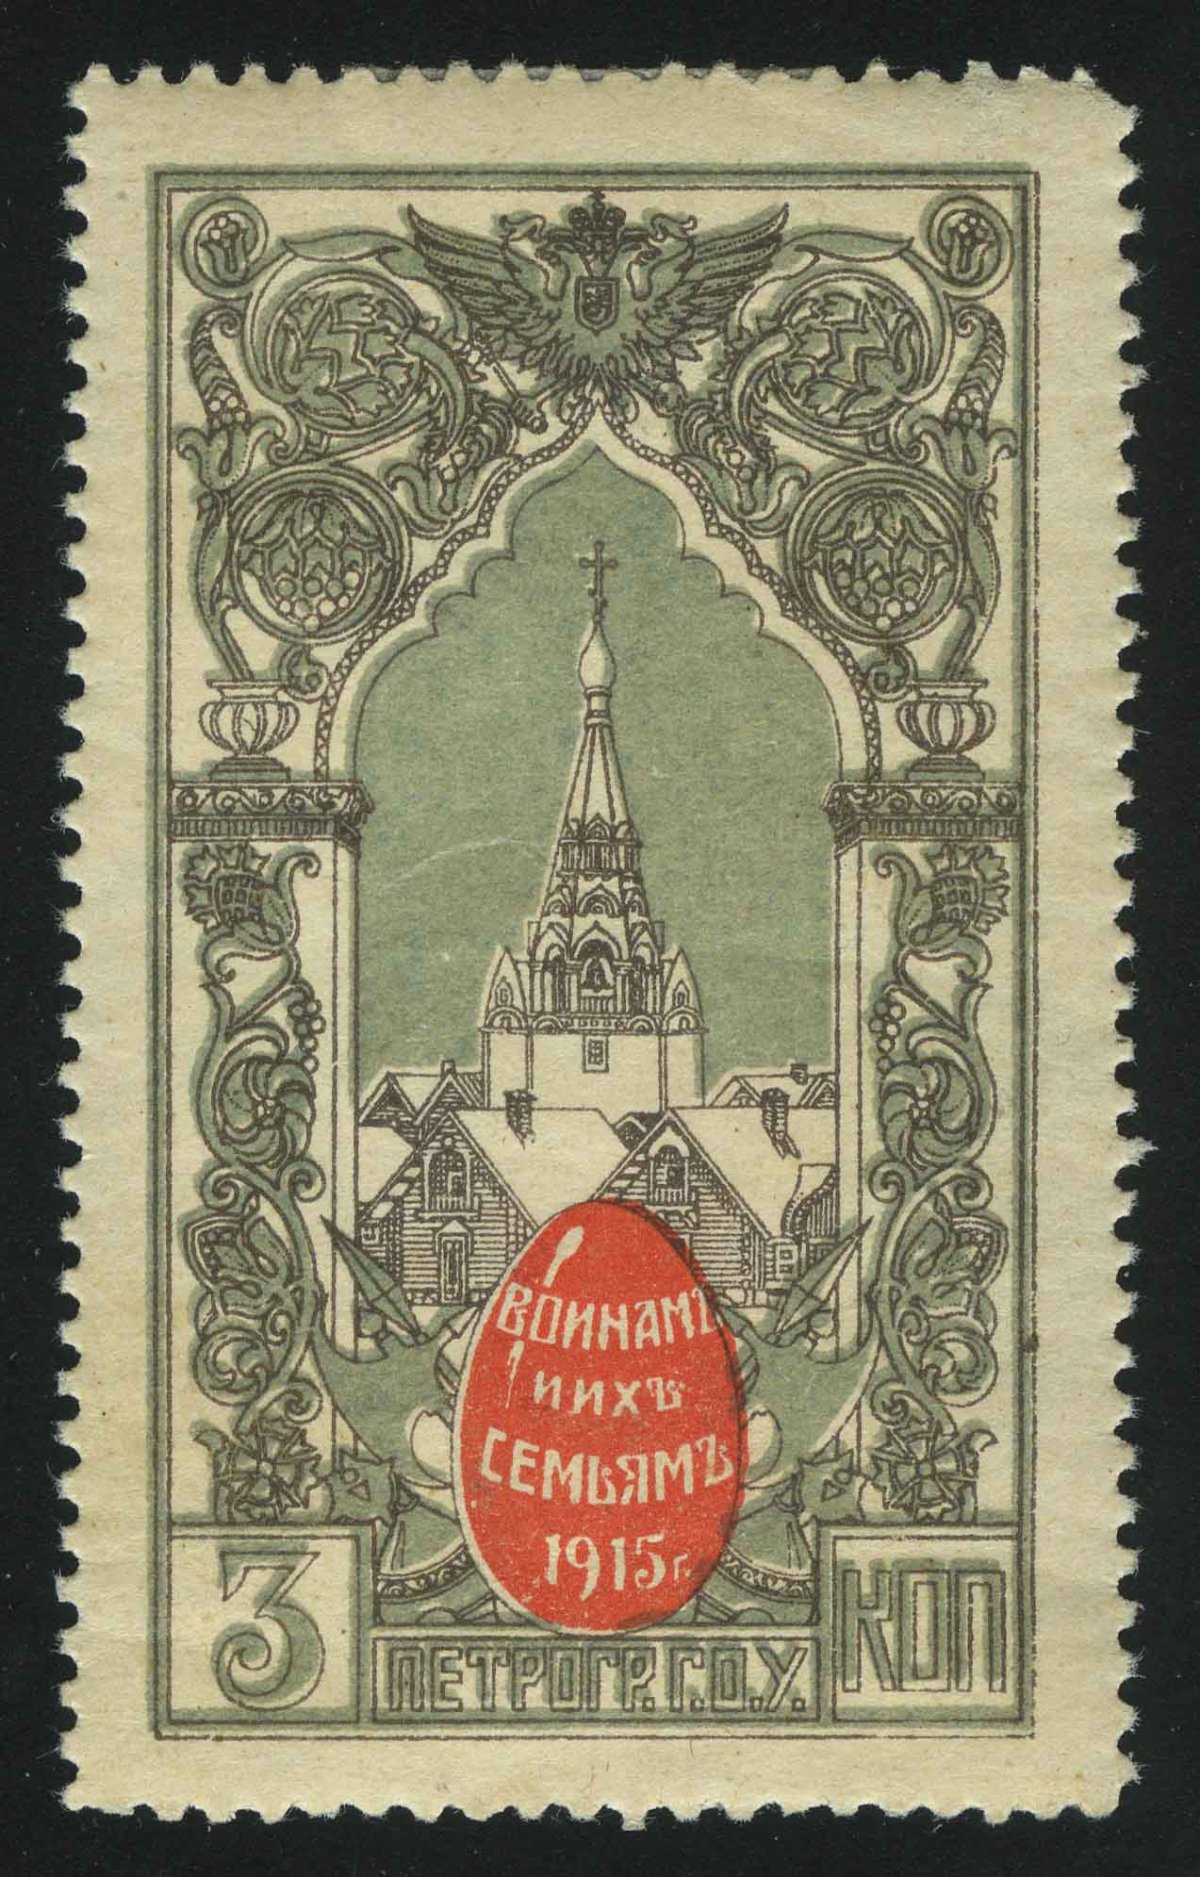 Petrograd, 1915, "To Soldiers and Their Families", 3 kopecks.